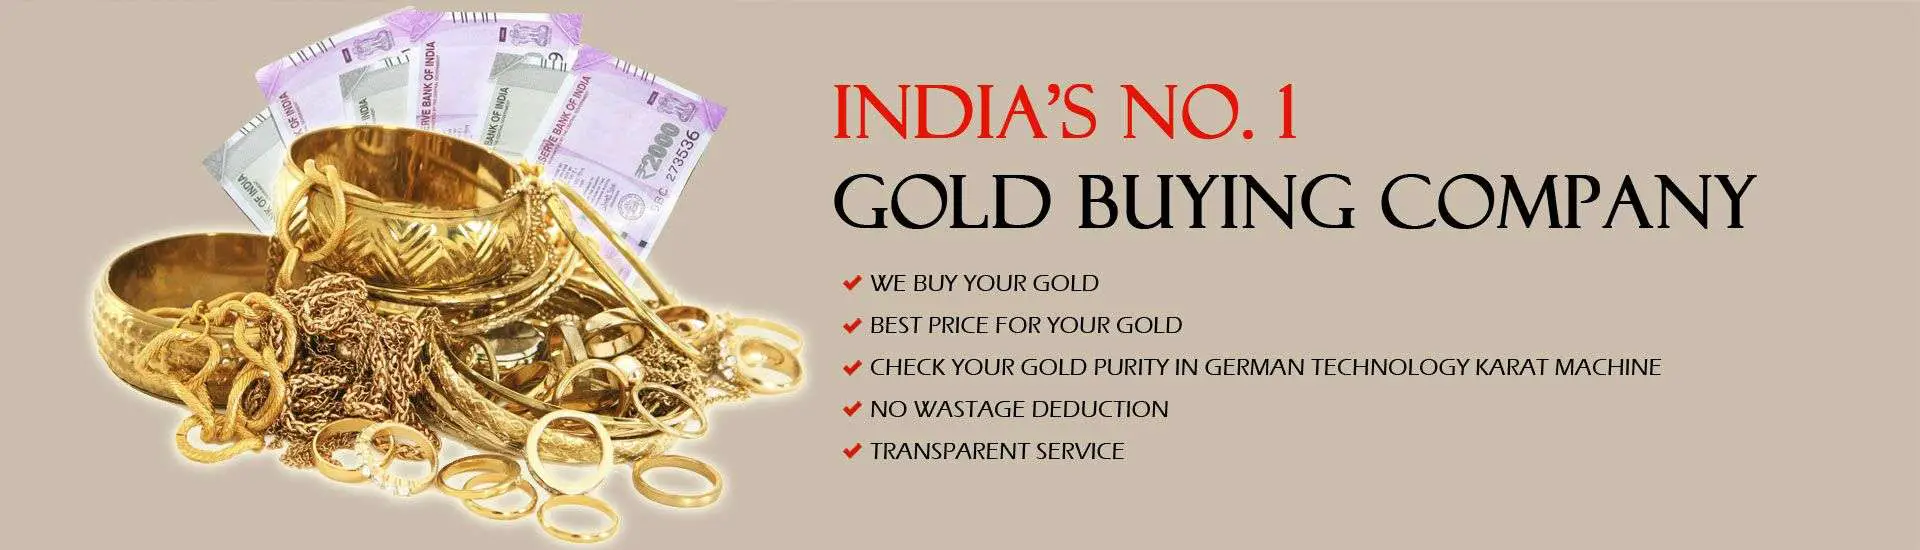 The best place to sell gold in noida is Sell Your Gold Delhi because we ...